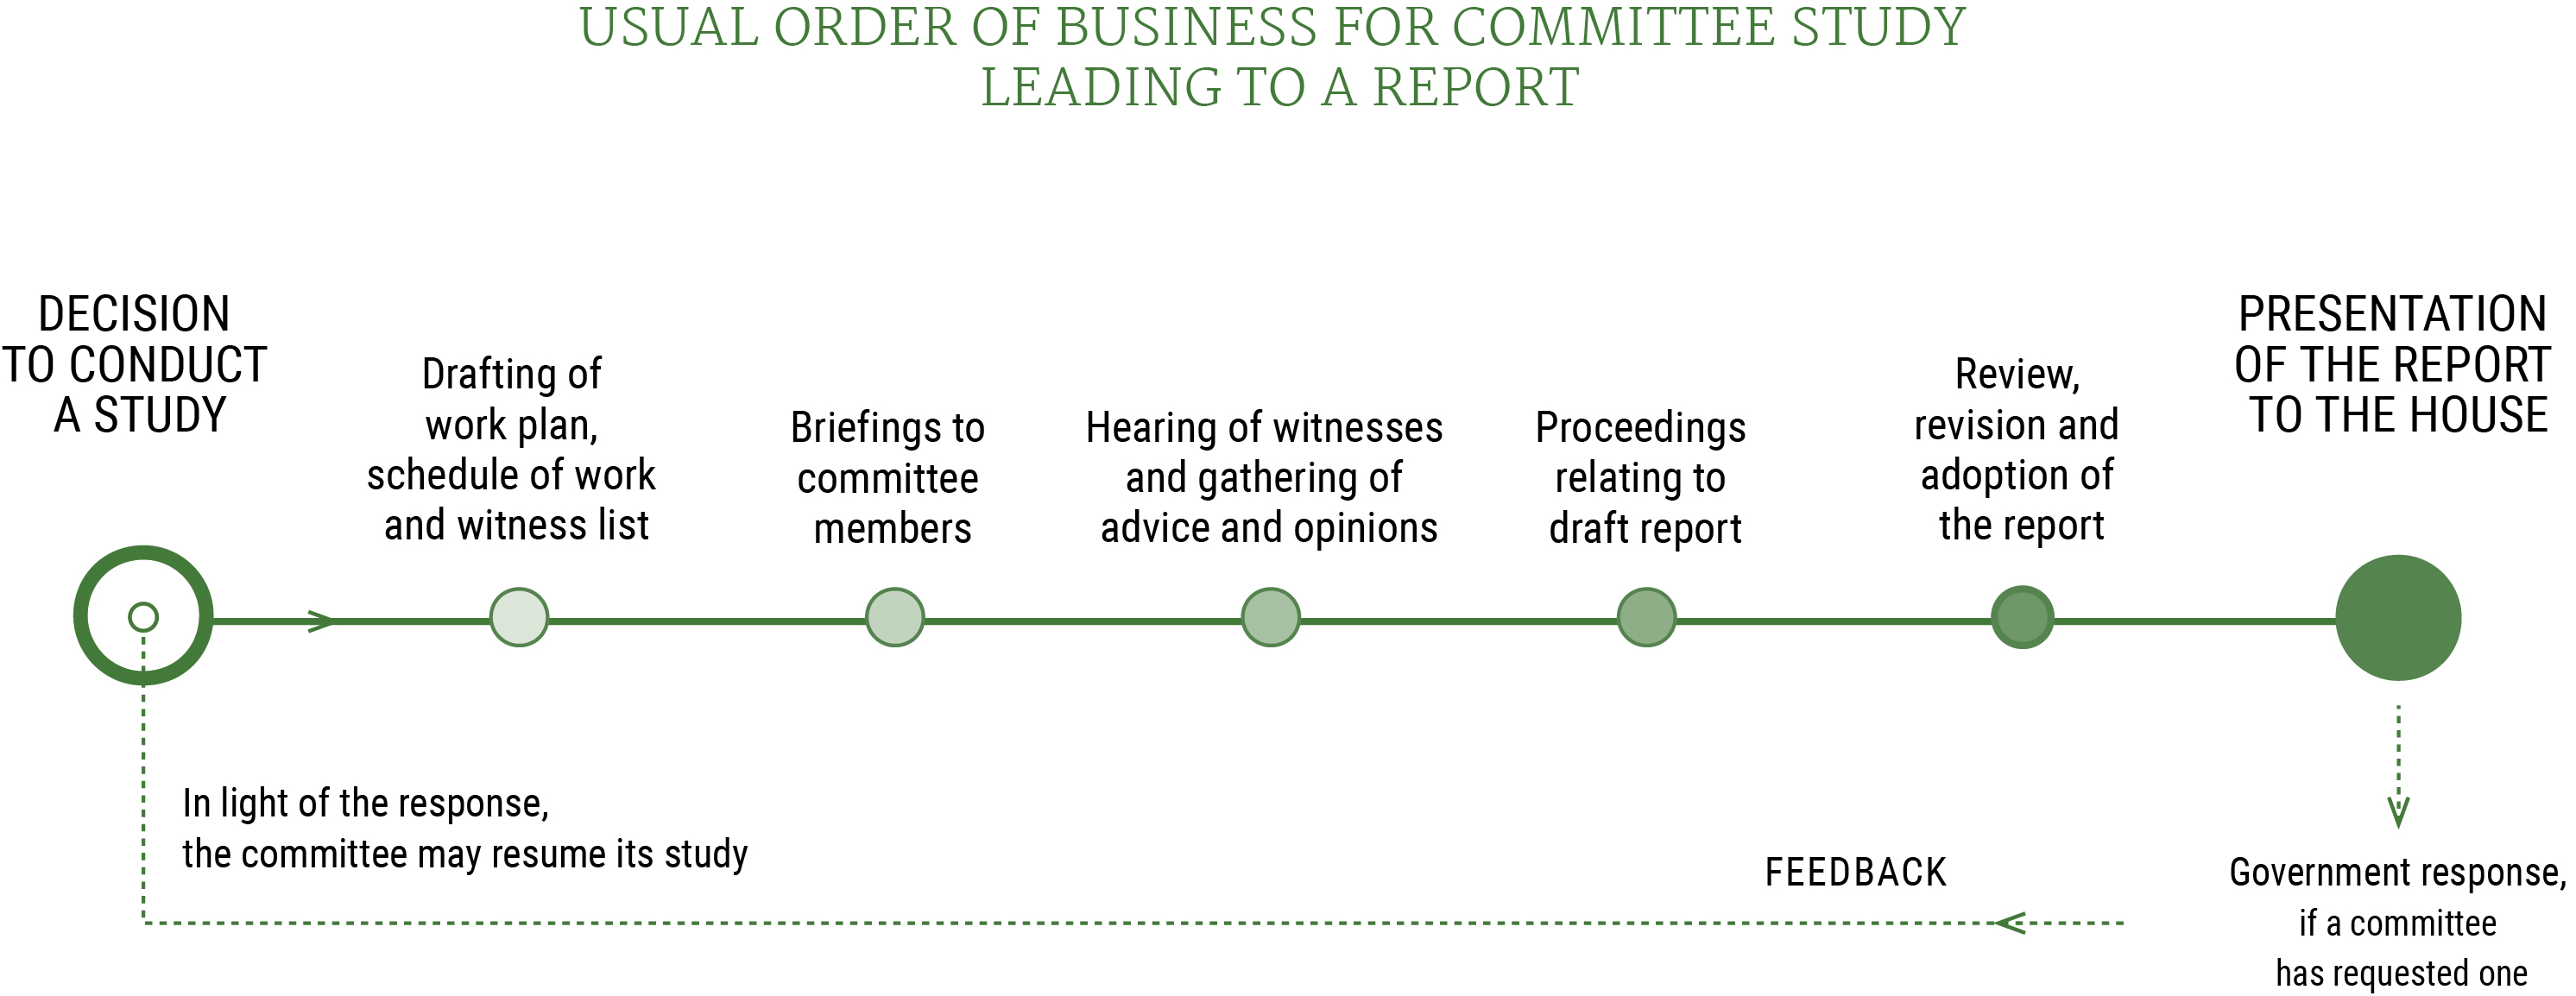 Diagram showing the usual order of business for a committee study leading to a report: DECISION TO CONDUCT A STUDY; Drafting of work plan, schedule of work and witness list; Briefings to committee members; Hearing of witnesses and gathering of advice and opinions; Proceedings relating to draft report; Review, revision and adoption of the report; PRESENTATION OF THE REPORT TO THE HOUSE; Government response, if a committee has requested one; FEEDBACK; In light of the response, the committee may resume its study.